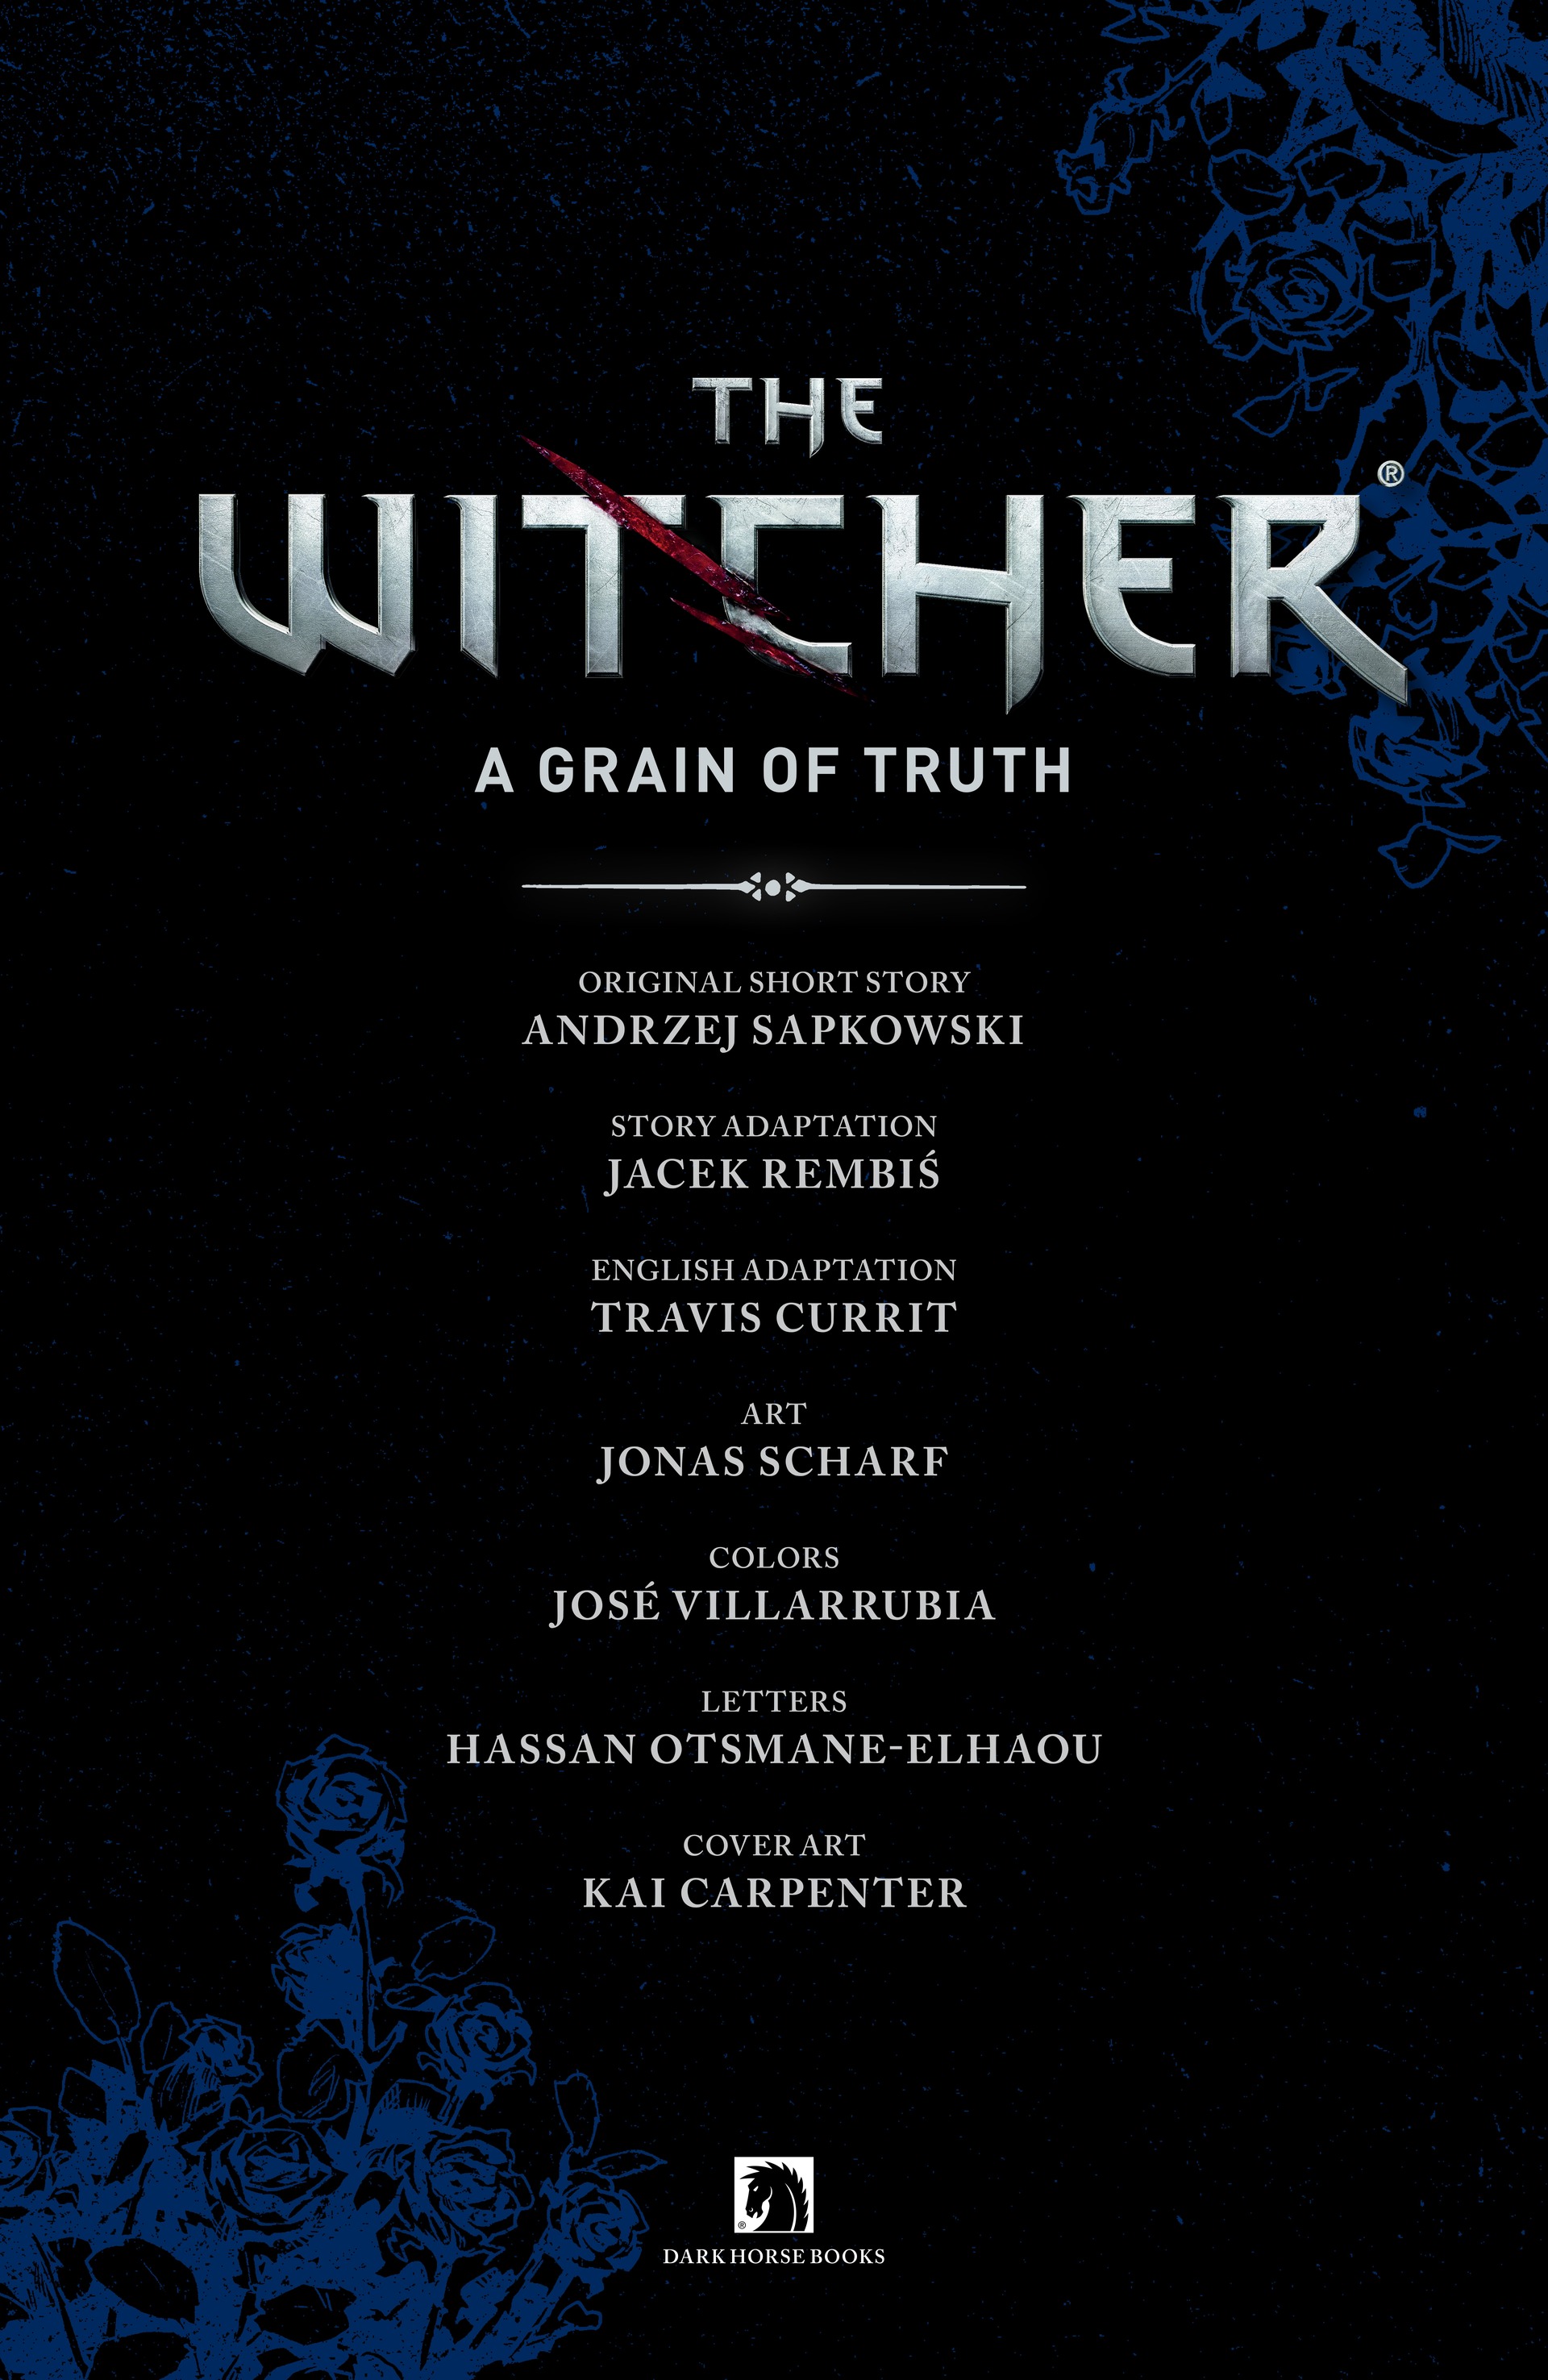 Read online The Witcher: A Grain of Truth comic -  Issue # Full - 3